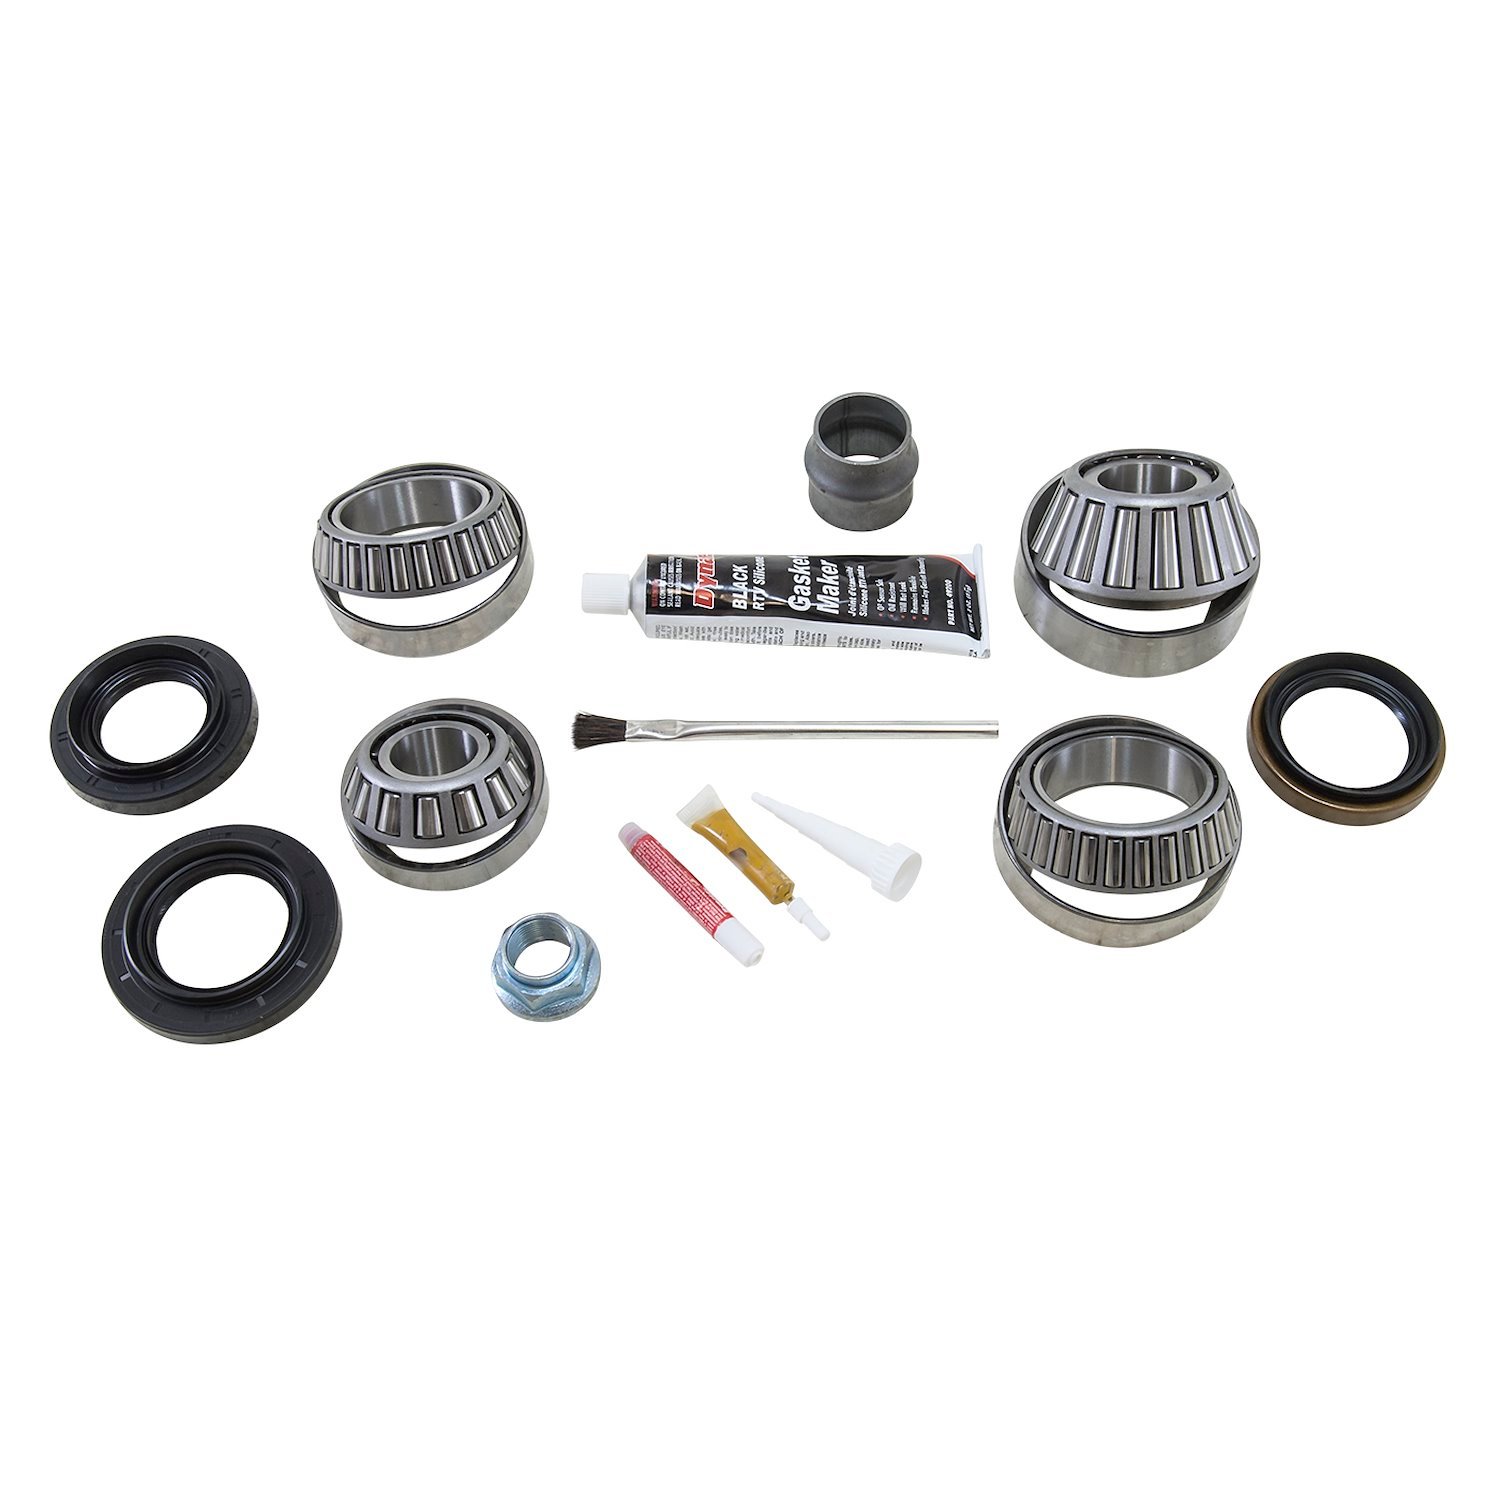 Bearing Install Kit For New Toyota Clamshell Reverse Rotation Front Diff